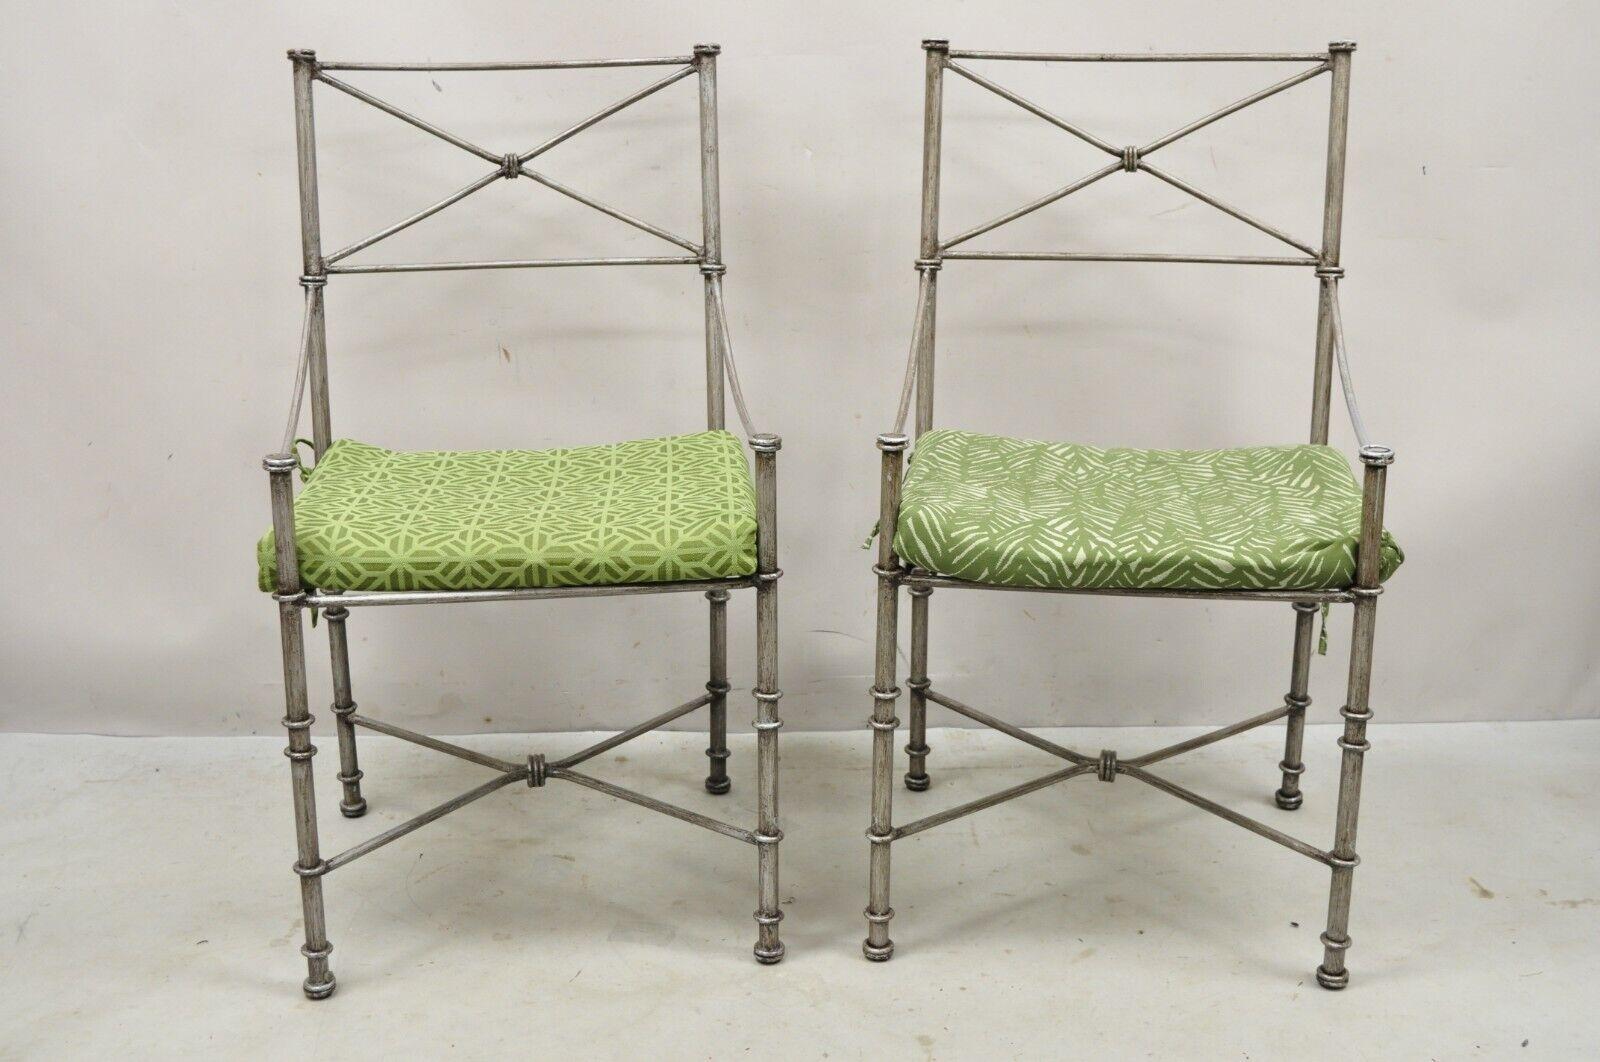 Pier 1 Medici Pewter wrought iron dining side chairs - a pair. Item features metal frames, distressed finish, very nice pair, great style and form, quality craftsmanship. Circa Late 20th Century. Measurements: 38